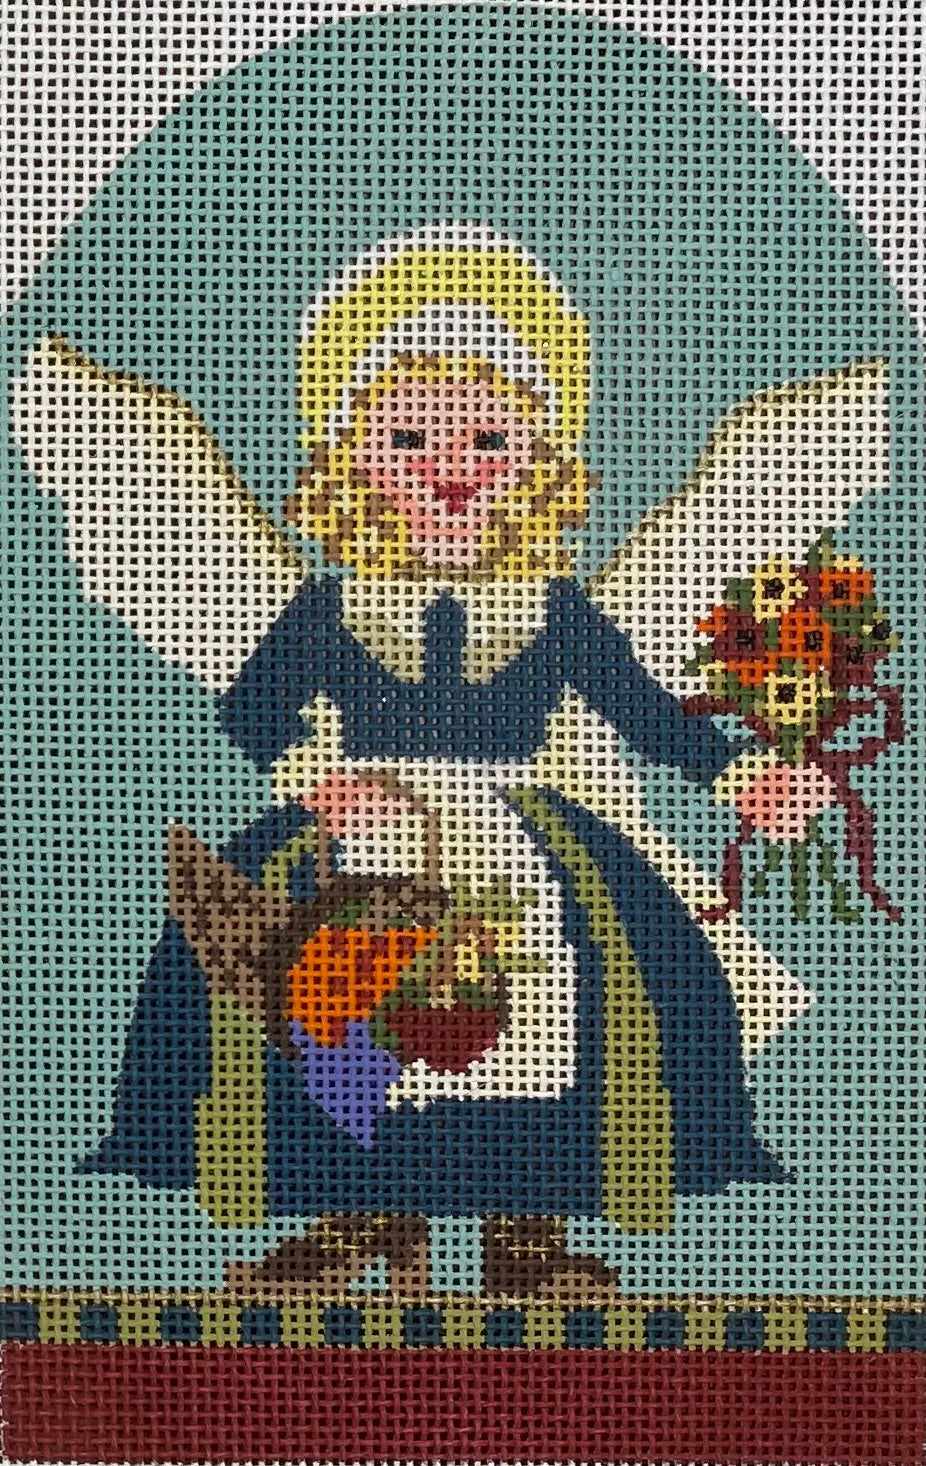 November Angel with stitch guide